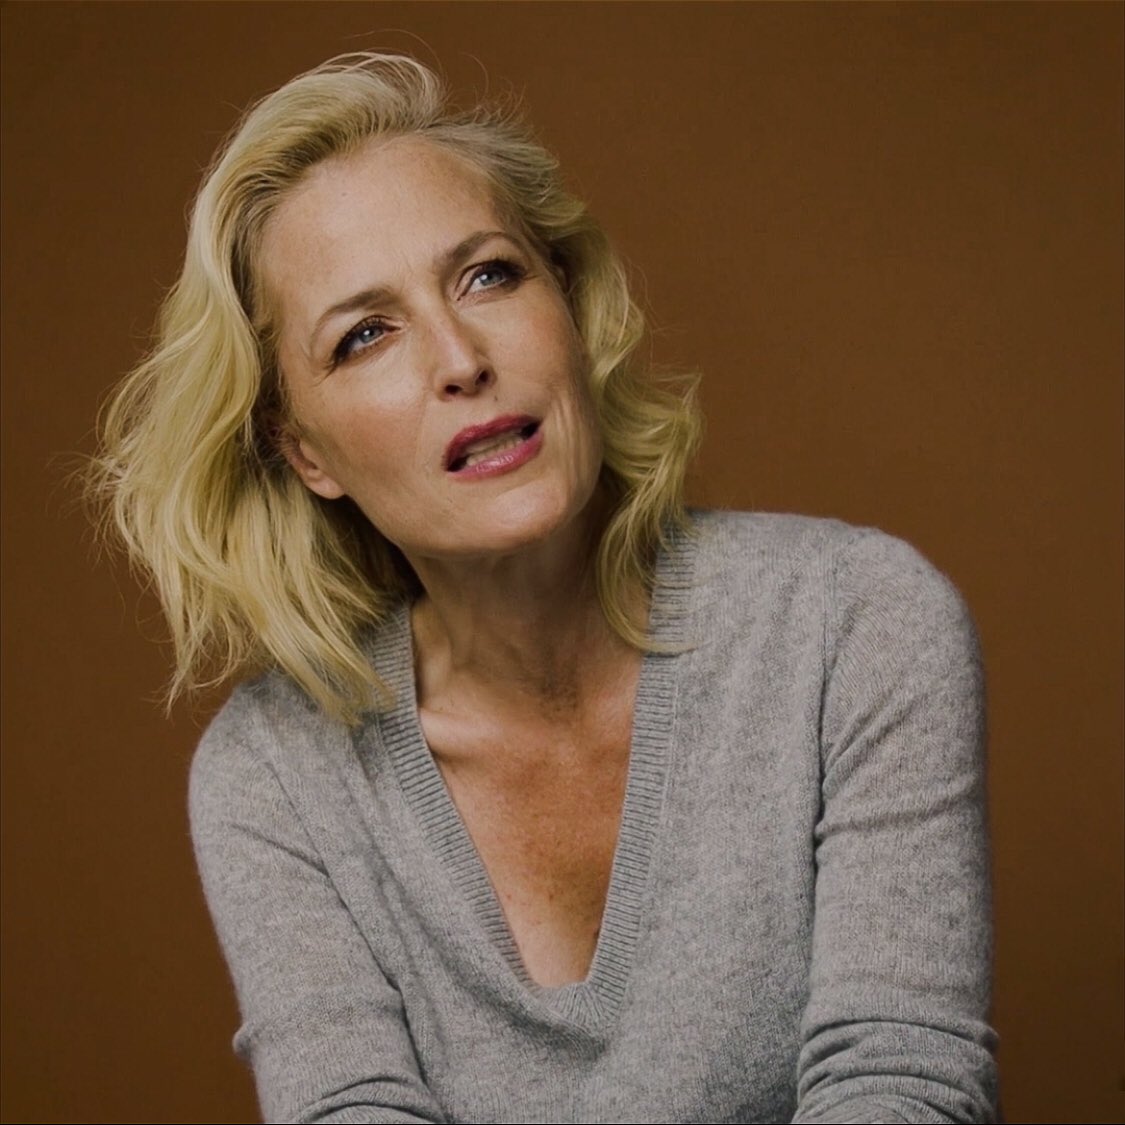 hd screenshots on dune london in conversation with gillian anderson 